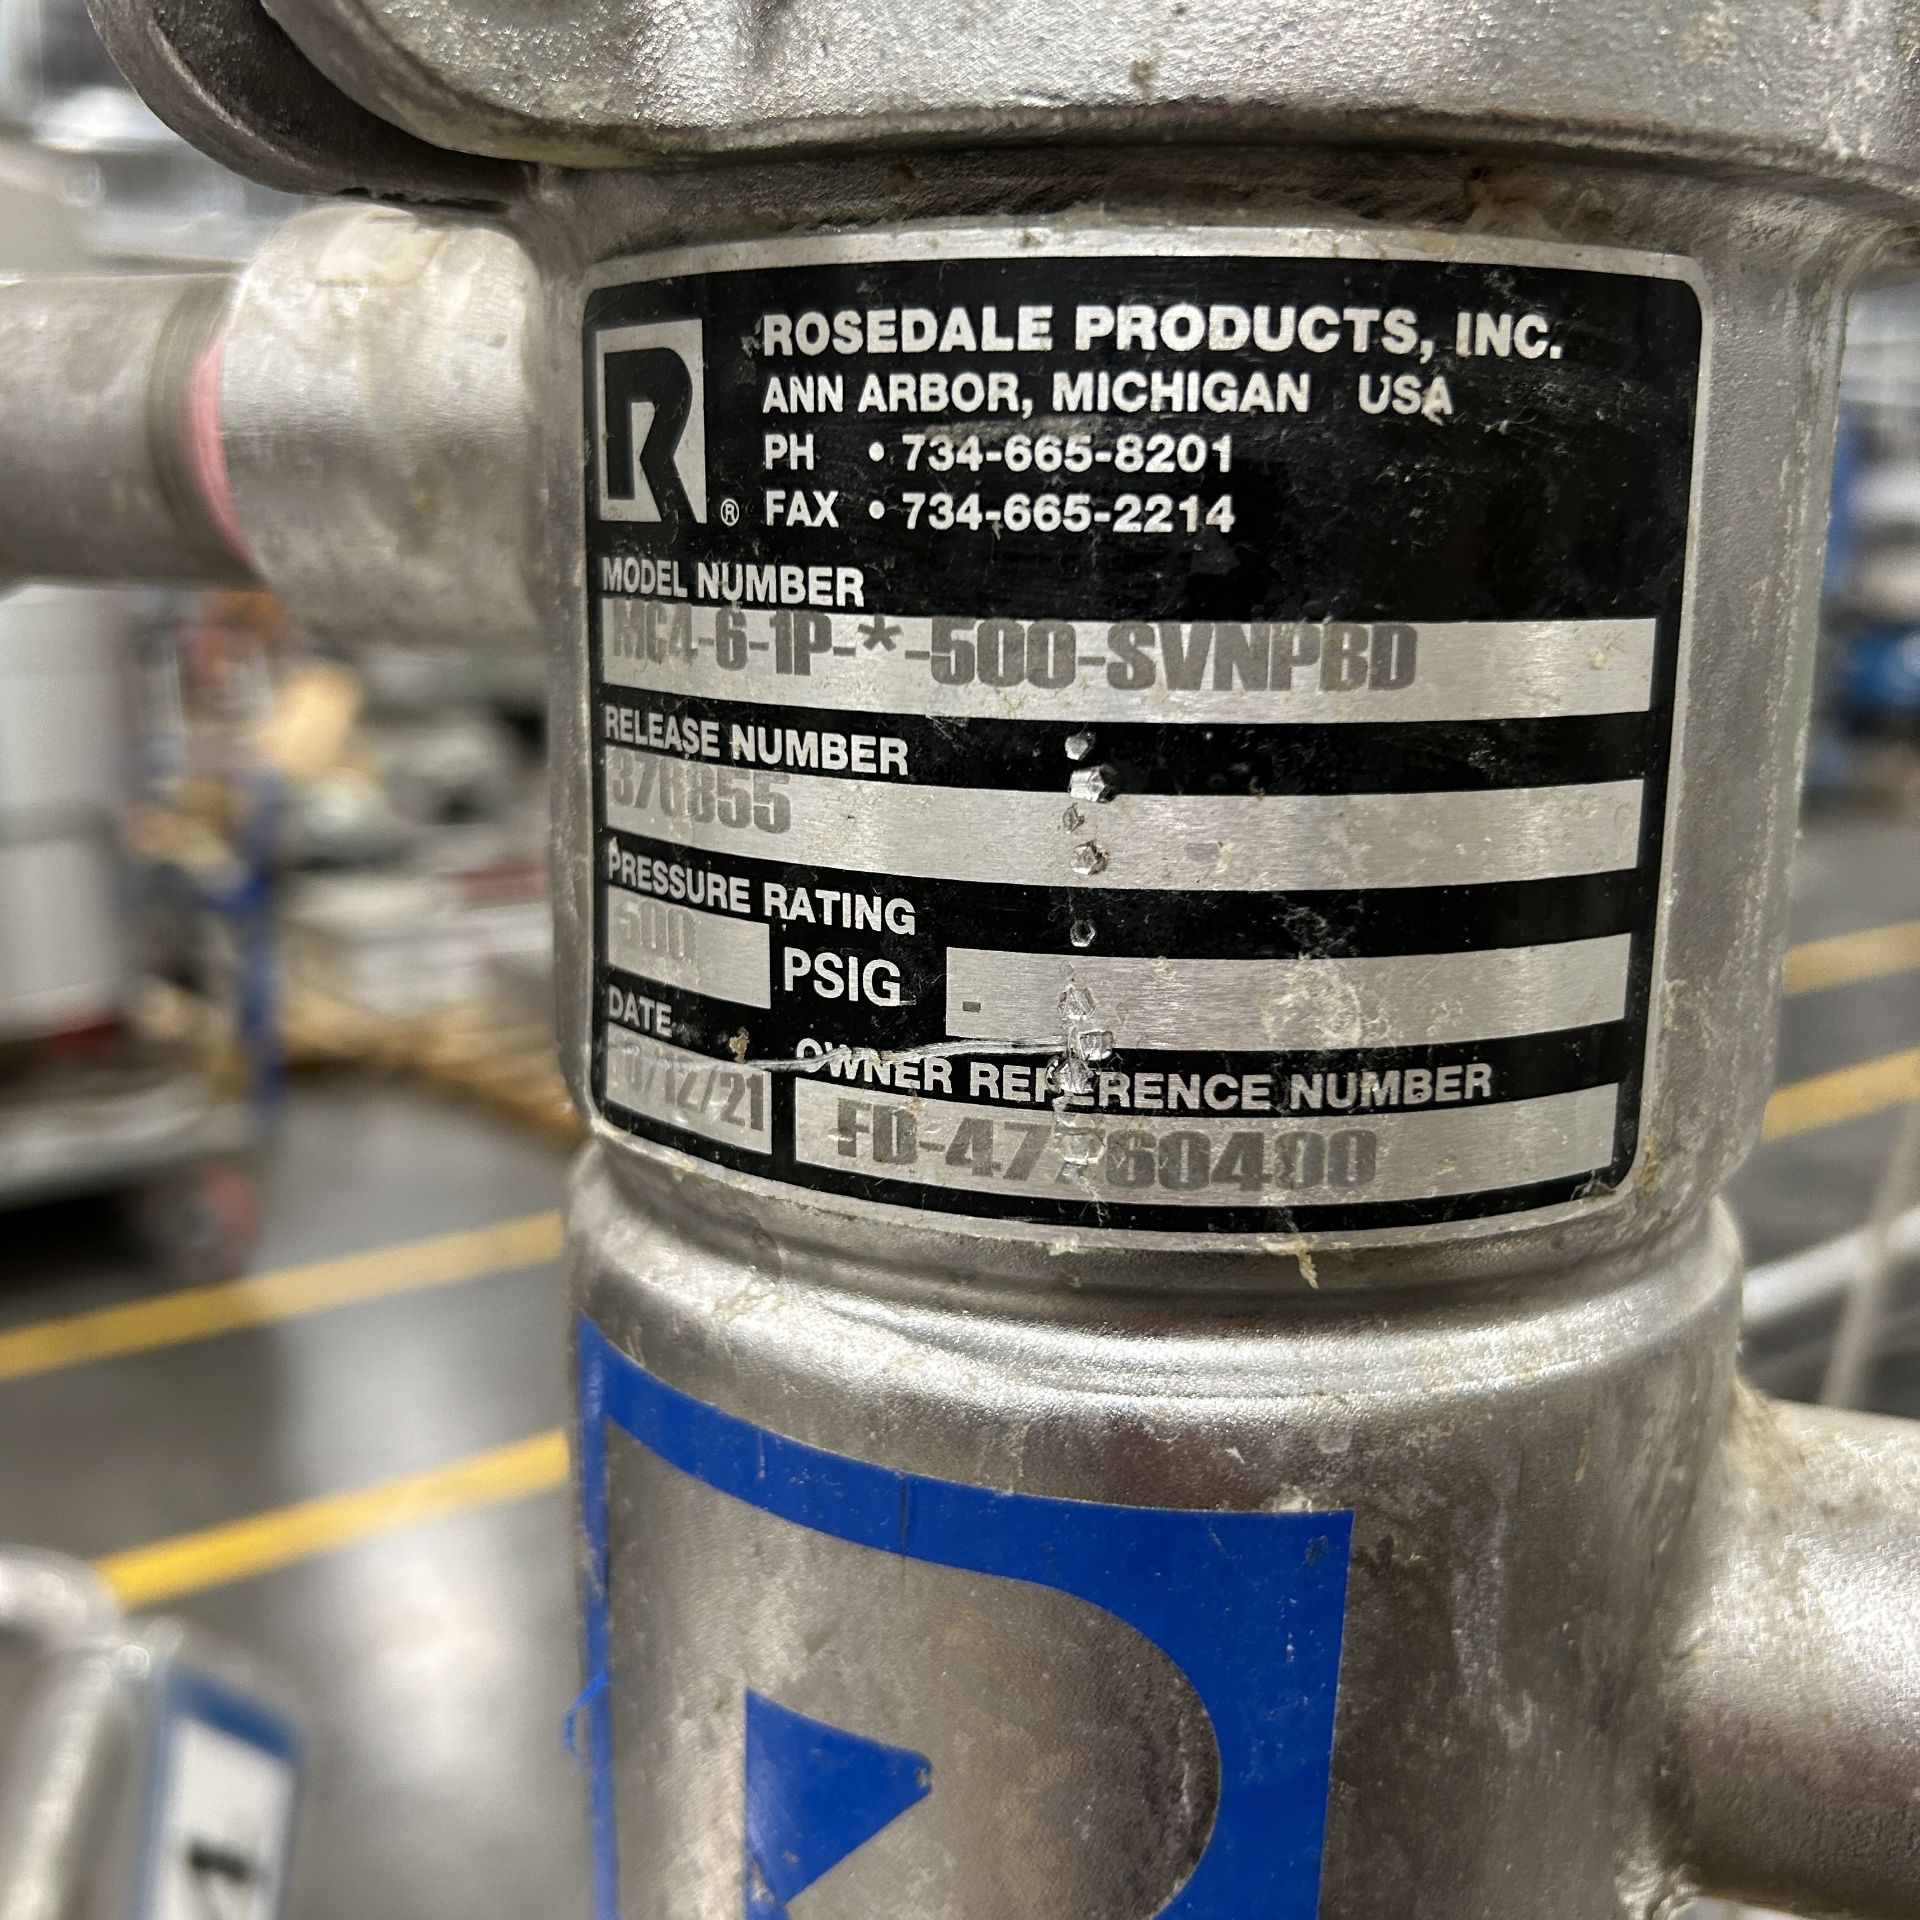 2019 Amherst Stainless Steel Agitation Pressure Pot - Image 10 of 12